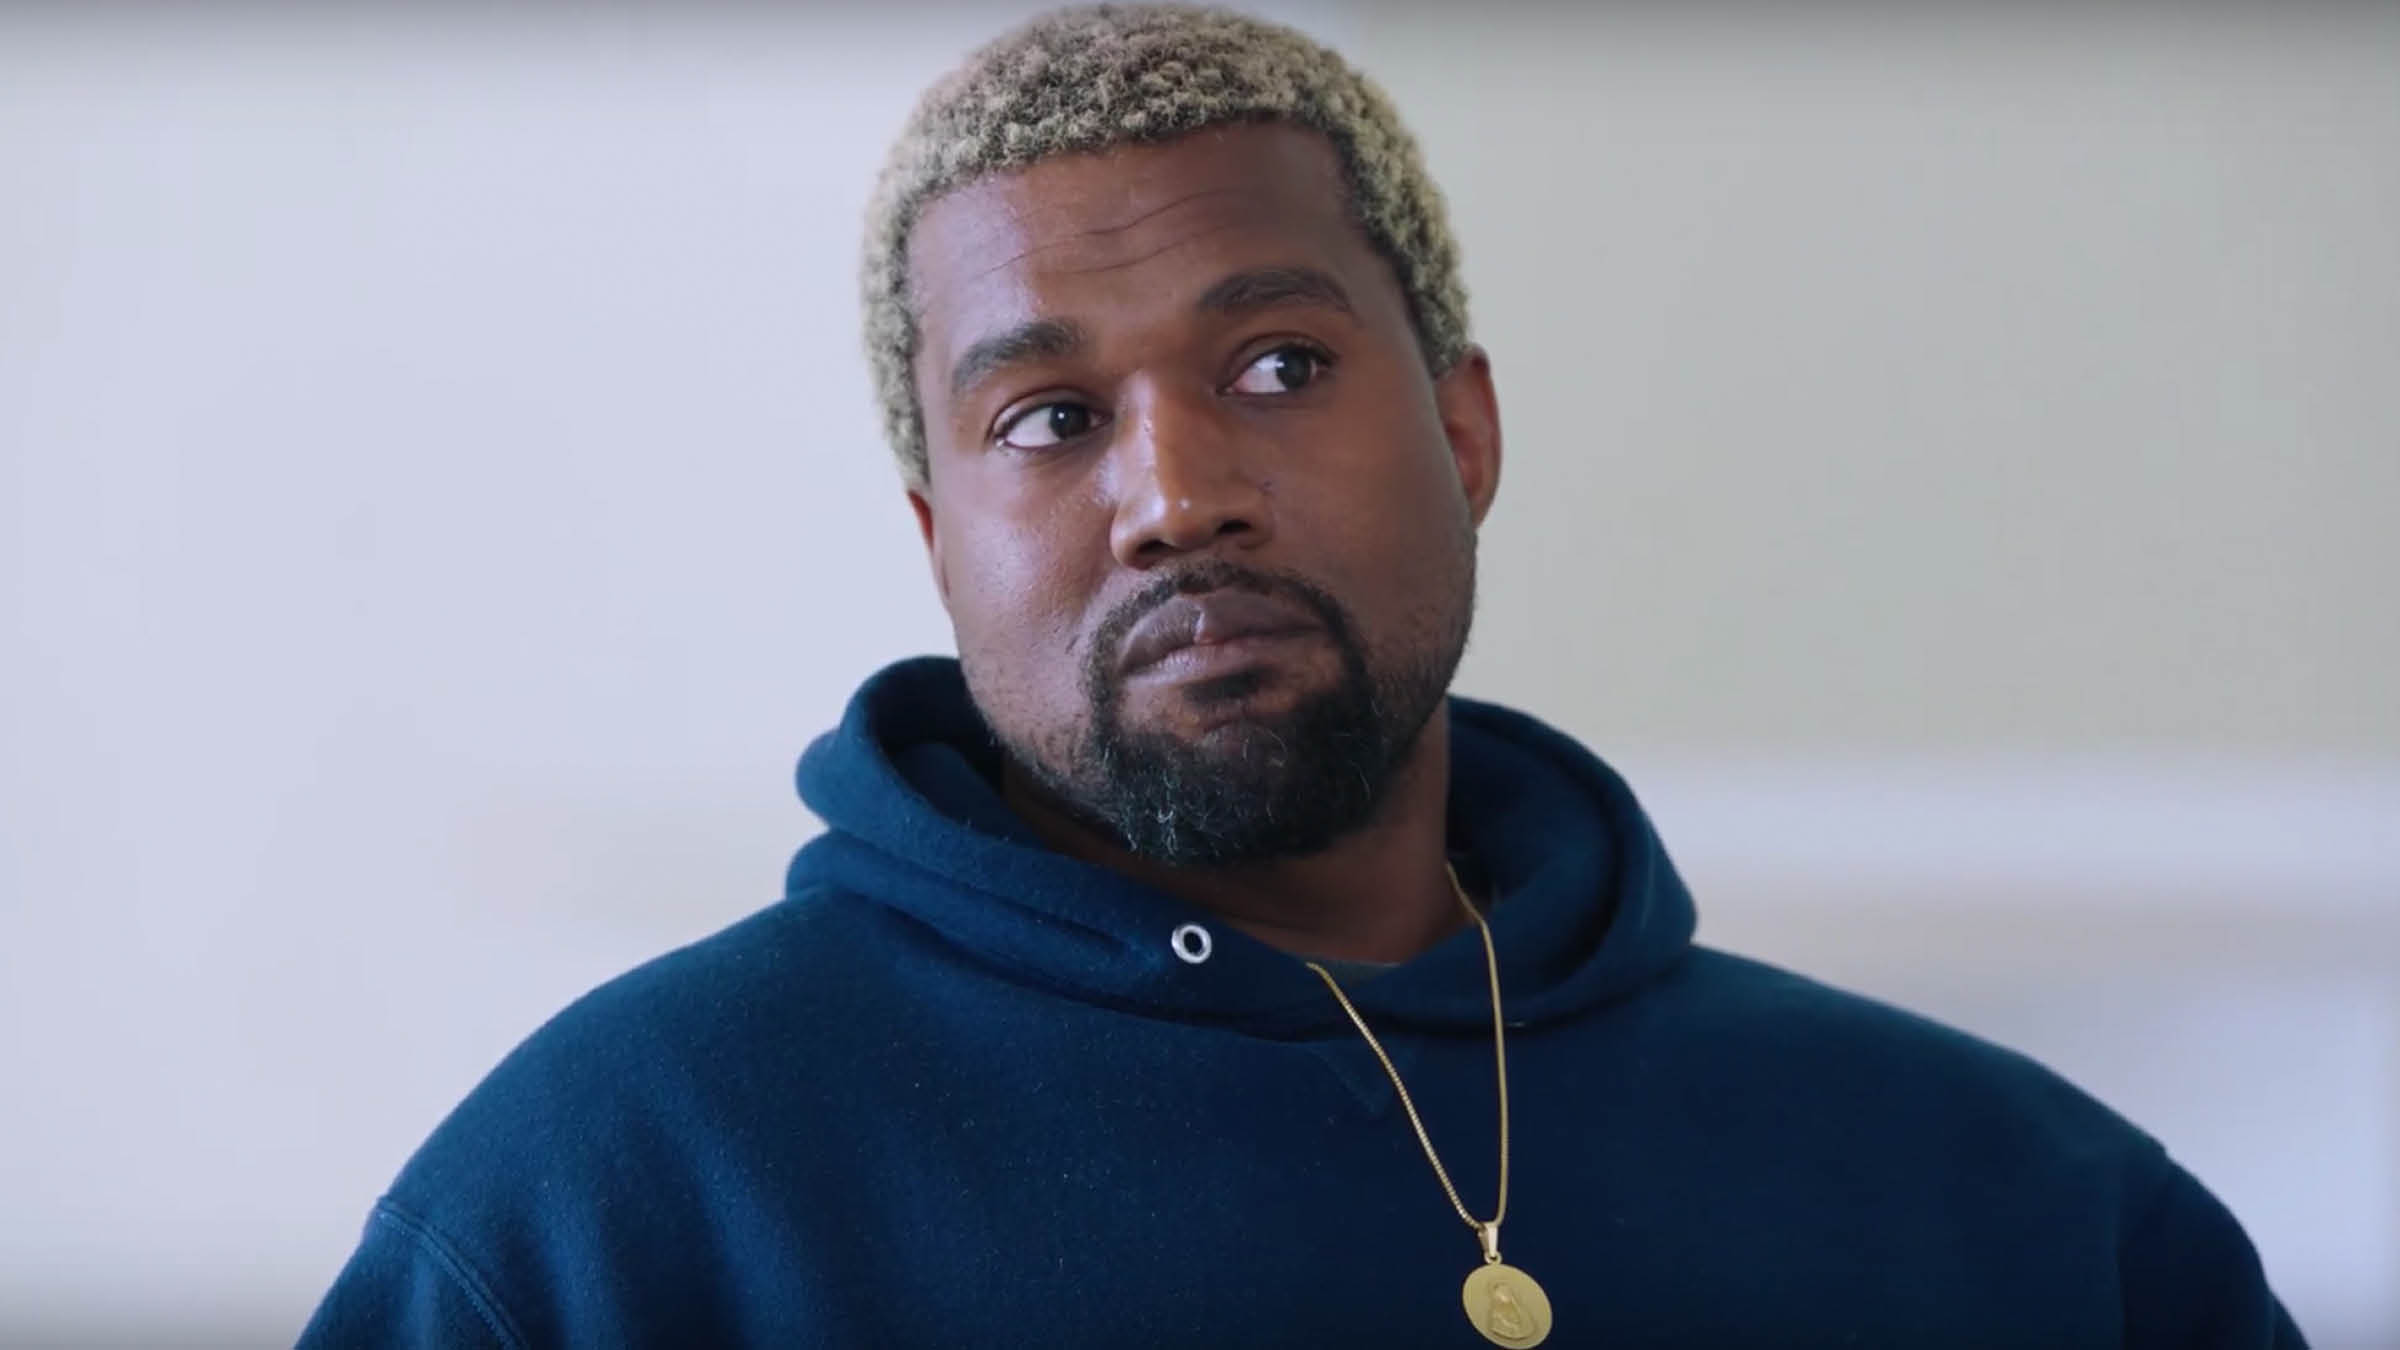 Rapper, Ye, also known as Kanye West in trouble over hate speech against Jews.